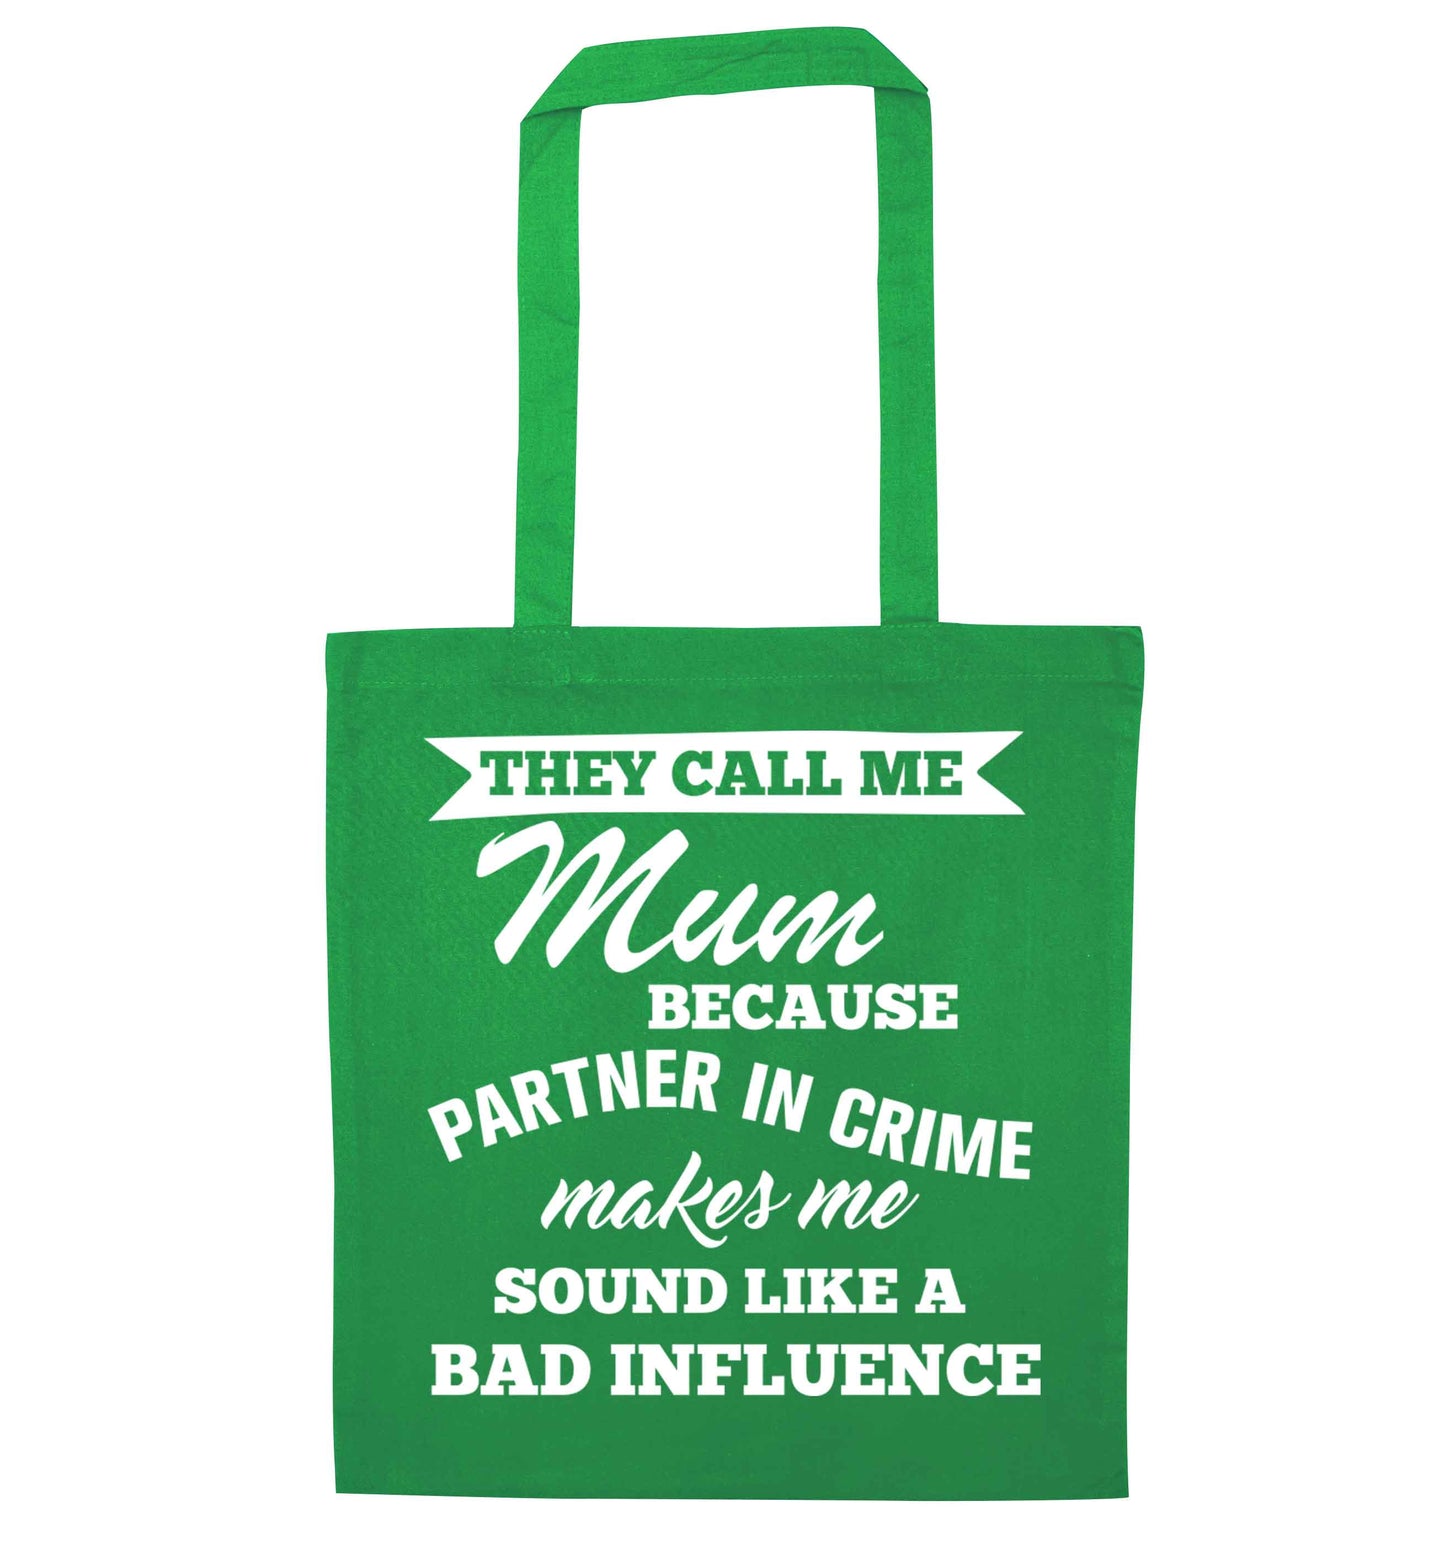 They call me mum because partner in crime makes me sound like a bad influence green tote bag